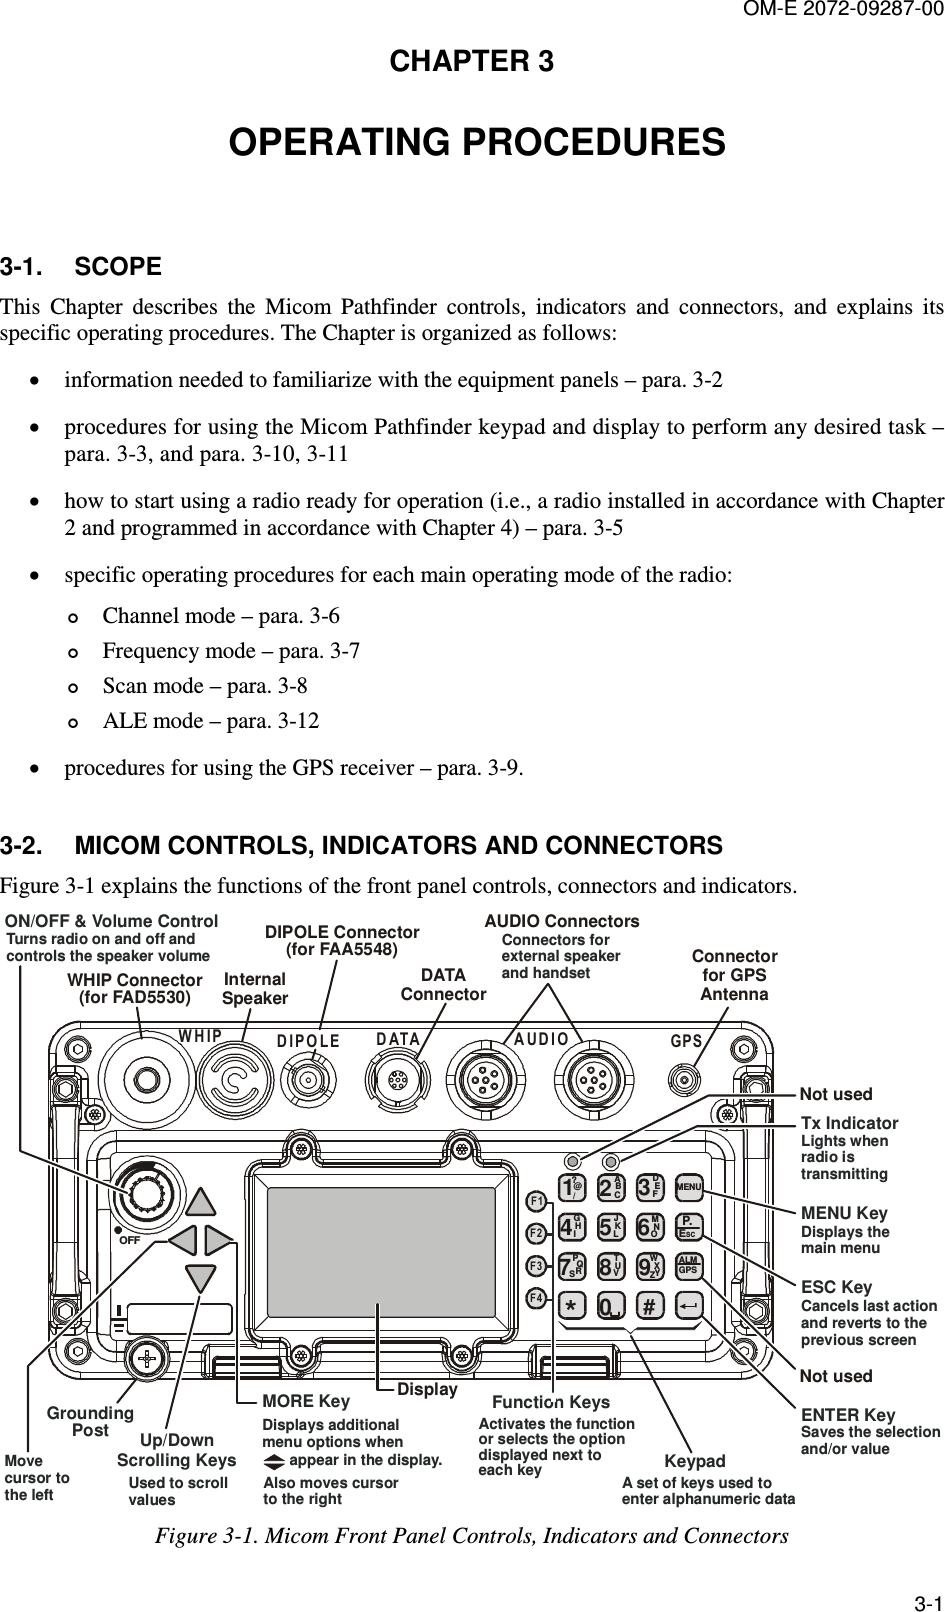 OM-E 2072-09287-00 3-1 CHAPTER 3   OPERATING PROCEDURES 3-1.  SCOPE This  Chapter  describes  the  Micom  Pathfinder  controls,  indicators  and  connectors,  and  explains  its specific operating procedures. The Chapter is organized as follows: • information needed to familiarize with the equipment panels – para.  3-2 • procedures for using the Micom Pathfinder keypad and display to perform any desired task – para.  3-3, and para.  3-10,  3-11 • how to start using a radio ready for operation (i.e., a radio installed in accordance with Chapter 2 and programmed in accordance with Chapter 4) – para.  3-5 • specific operating procedures for each main operating mode of the radio:  Channel mode – para.  3-6  Frequency mode – para.  3-7  Scan mode – para.  3-8  ALE mode – para.  3-12 • procedures for using the GPS receiver – para.  3-9. 3-2.  MICOM CONTROLS, INDICATORS AND CONNECTORS Figure  3-1 explains the functions of the front panel controls, connectors and indicators.  GPSF1F2F3F4D ATAD I P O L EW H I P1?@AGJTDMWPBHKUENXQCILVFOYRZS/234567890#*ALMGPSP.ESCMENUA U D I OOFFInternal SpeakerDisplayDATAConnectorConnectorfor GPSAntennaNot usedNot usedUp/Down Scrolling KeysUsed to scrollvaluesMovecursor tothe leftON/OFF &amp; Volume ControlTurns radio on and off and controls the speaker volumeAUDIO ConnectorsConnectors forexternal speakerand handsetTx IndicatorLights whenradio istransmittingKeypadA set of keys used to enter alphanumeric dataFunction KeysDisplays the main menuMENU KeyCancels last actionand reverts to the previous screen ESC KeySaves the selectionand/or valueENTER KeyMORE KeyDisplays additionalmenu options when appear in the display.Also moves cursor to the rightWHIP Connector(for FAD5530)DIPOLE Connector(for FAA5548)GroundingPostActivates the function or selects the option displayed next to each key Figure  3-1. Micom Front Panel Controls, Indicators and Connectors 